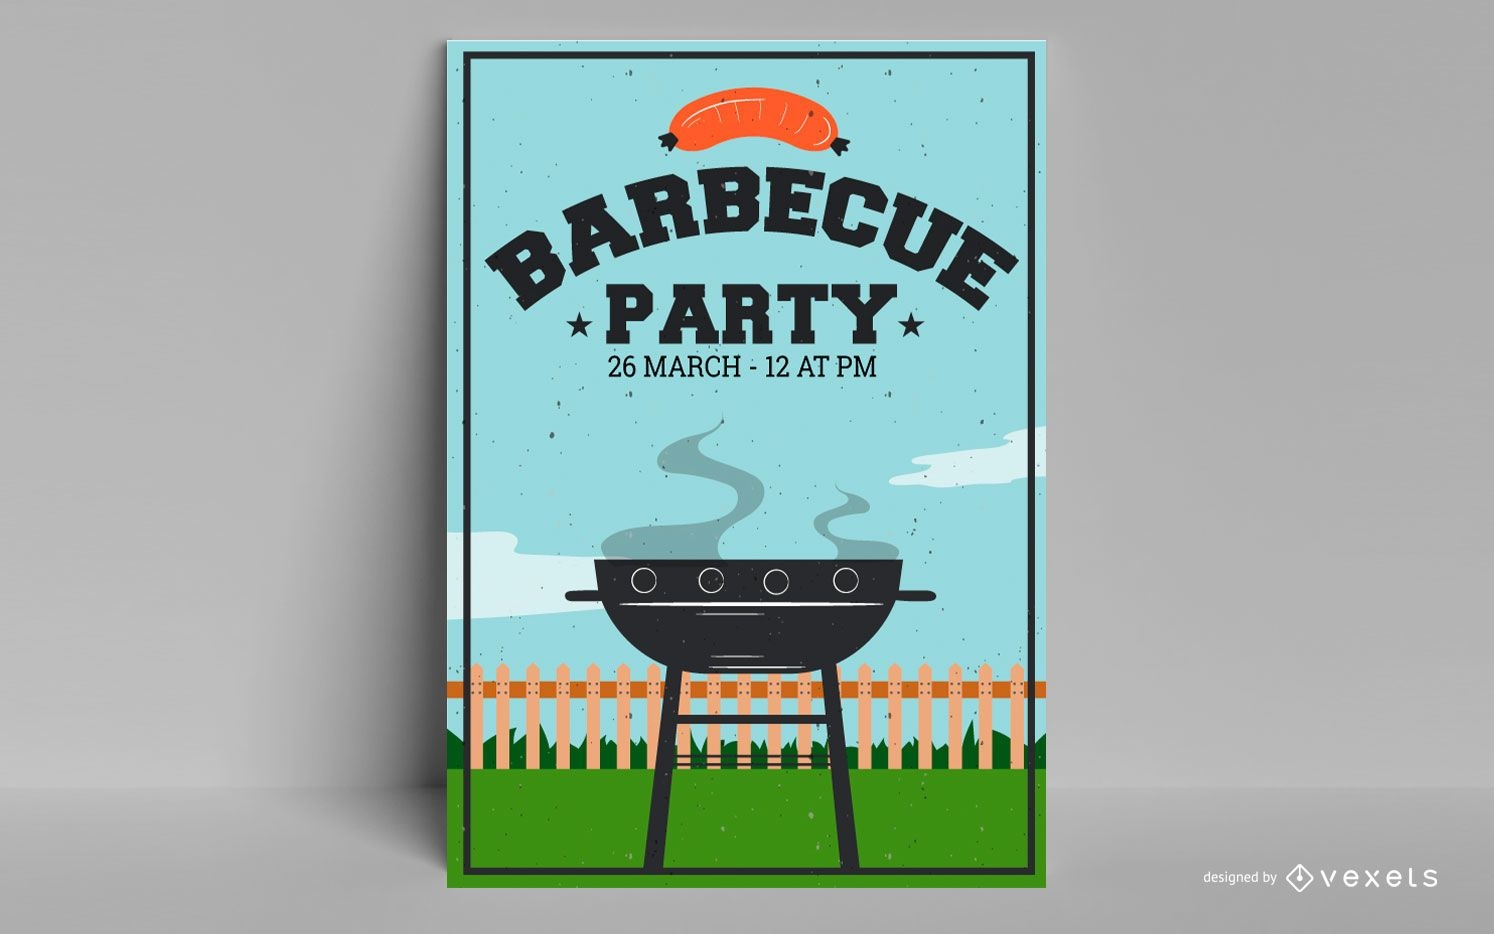 Barbecue party poster design